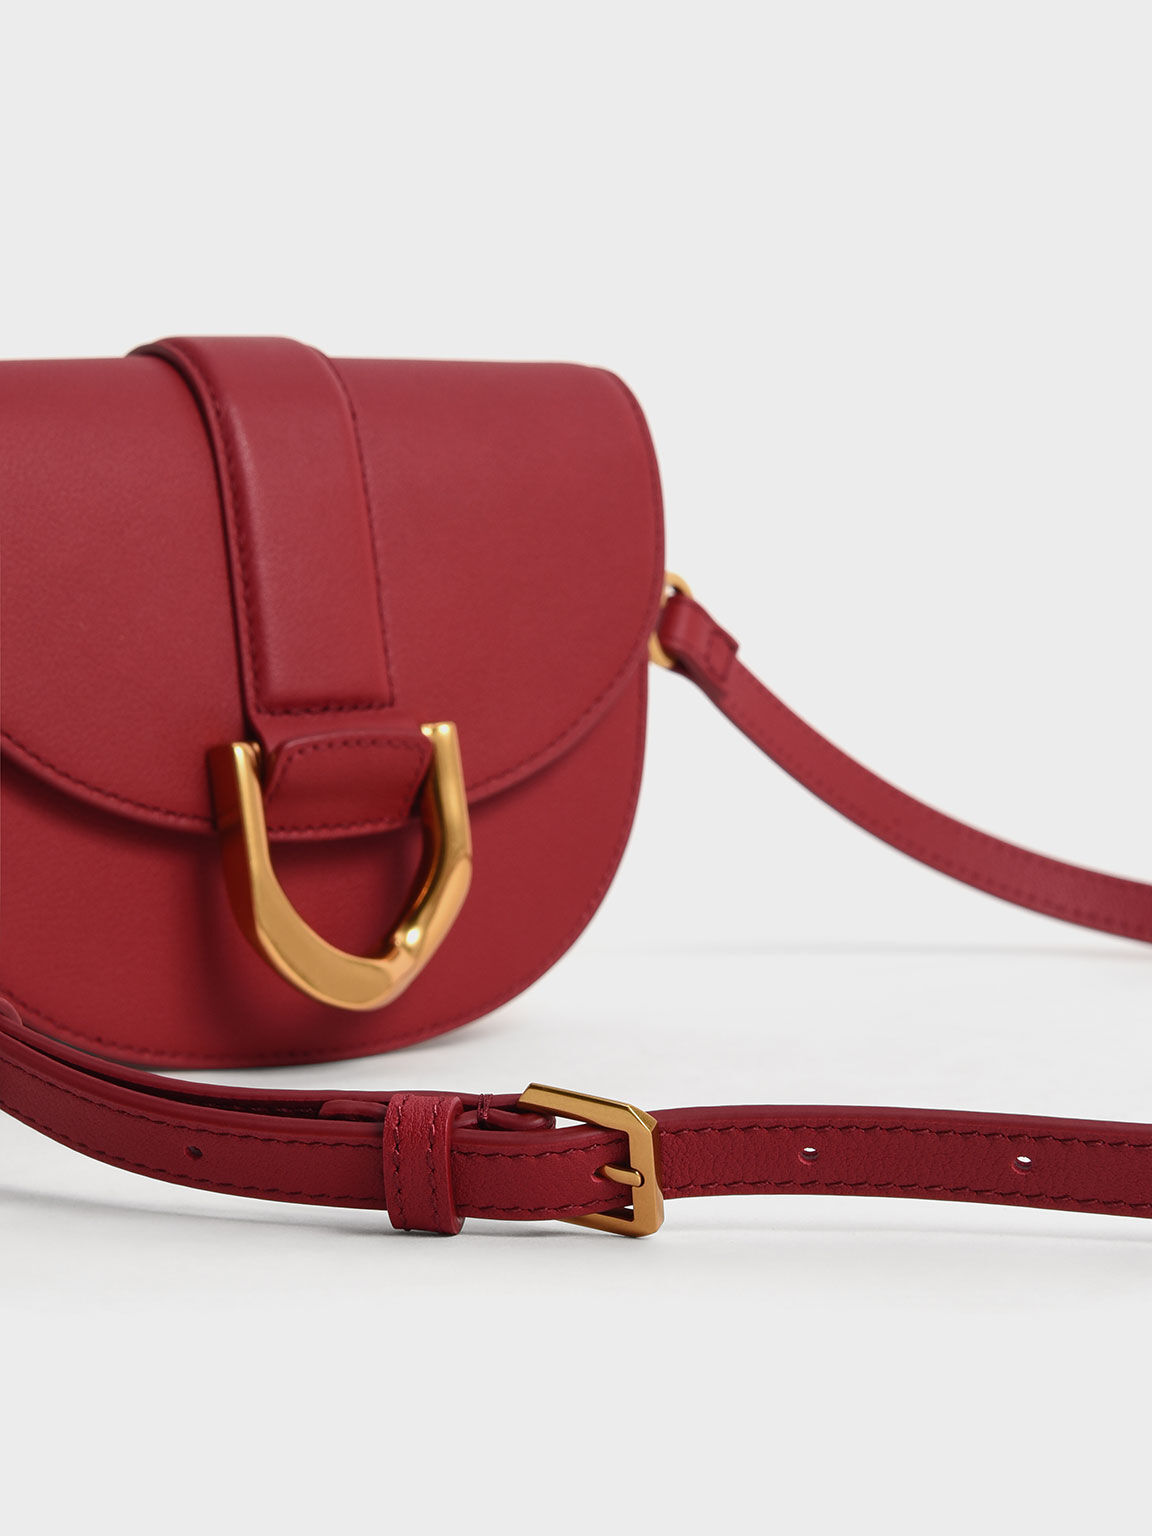 Lunar New Year Collection: Mini Gabine Leather Saddle Bag, Red, hi-res